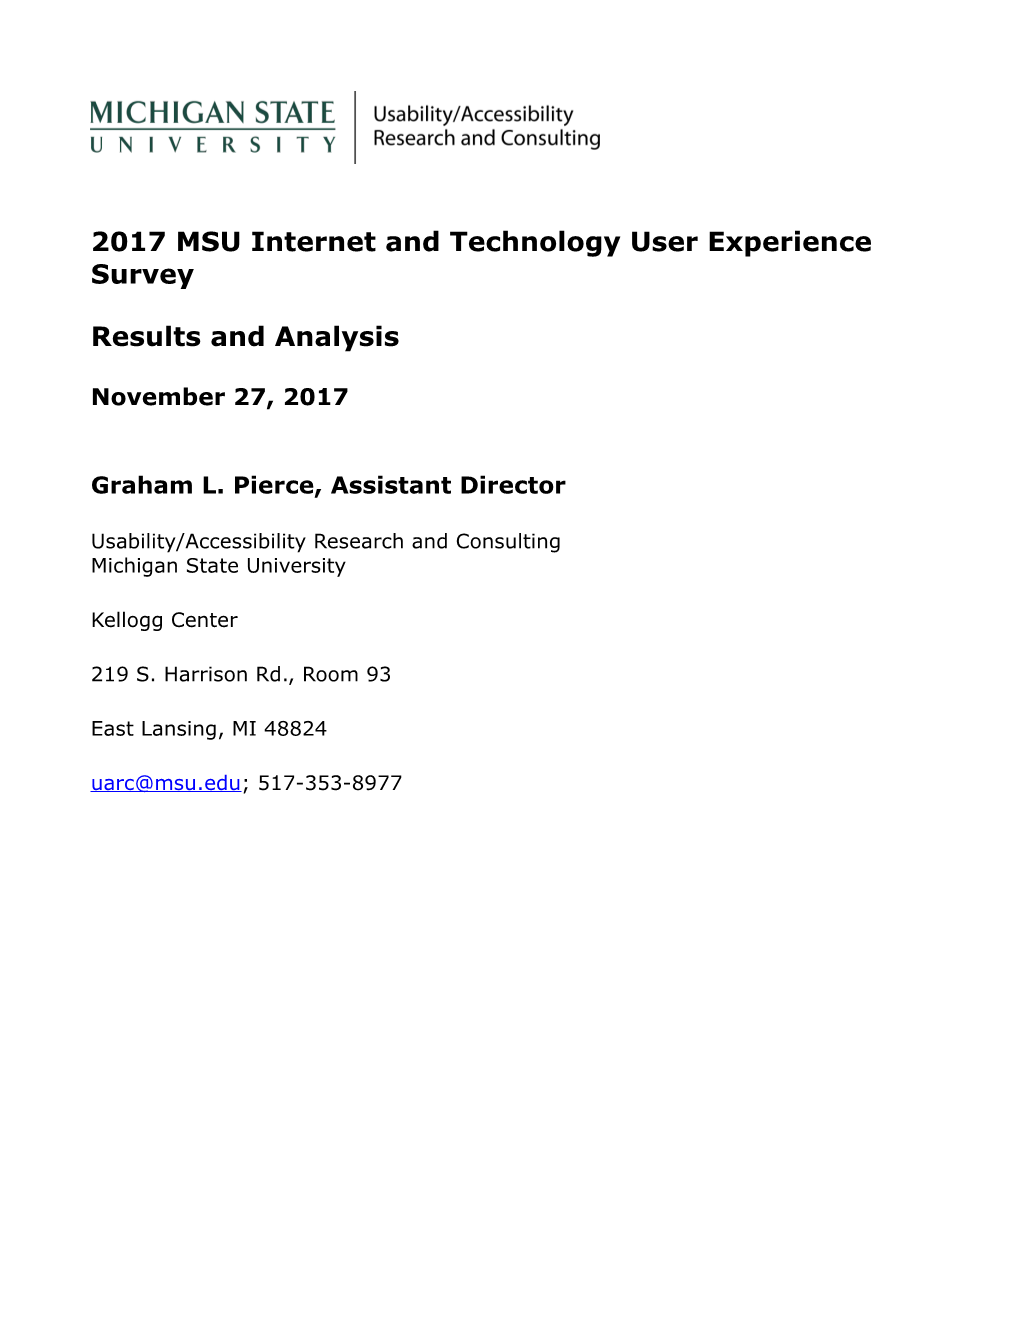 2017 MSU Internet and Technology User Experience Survey: Results and Analysis